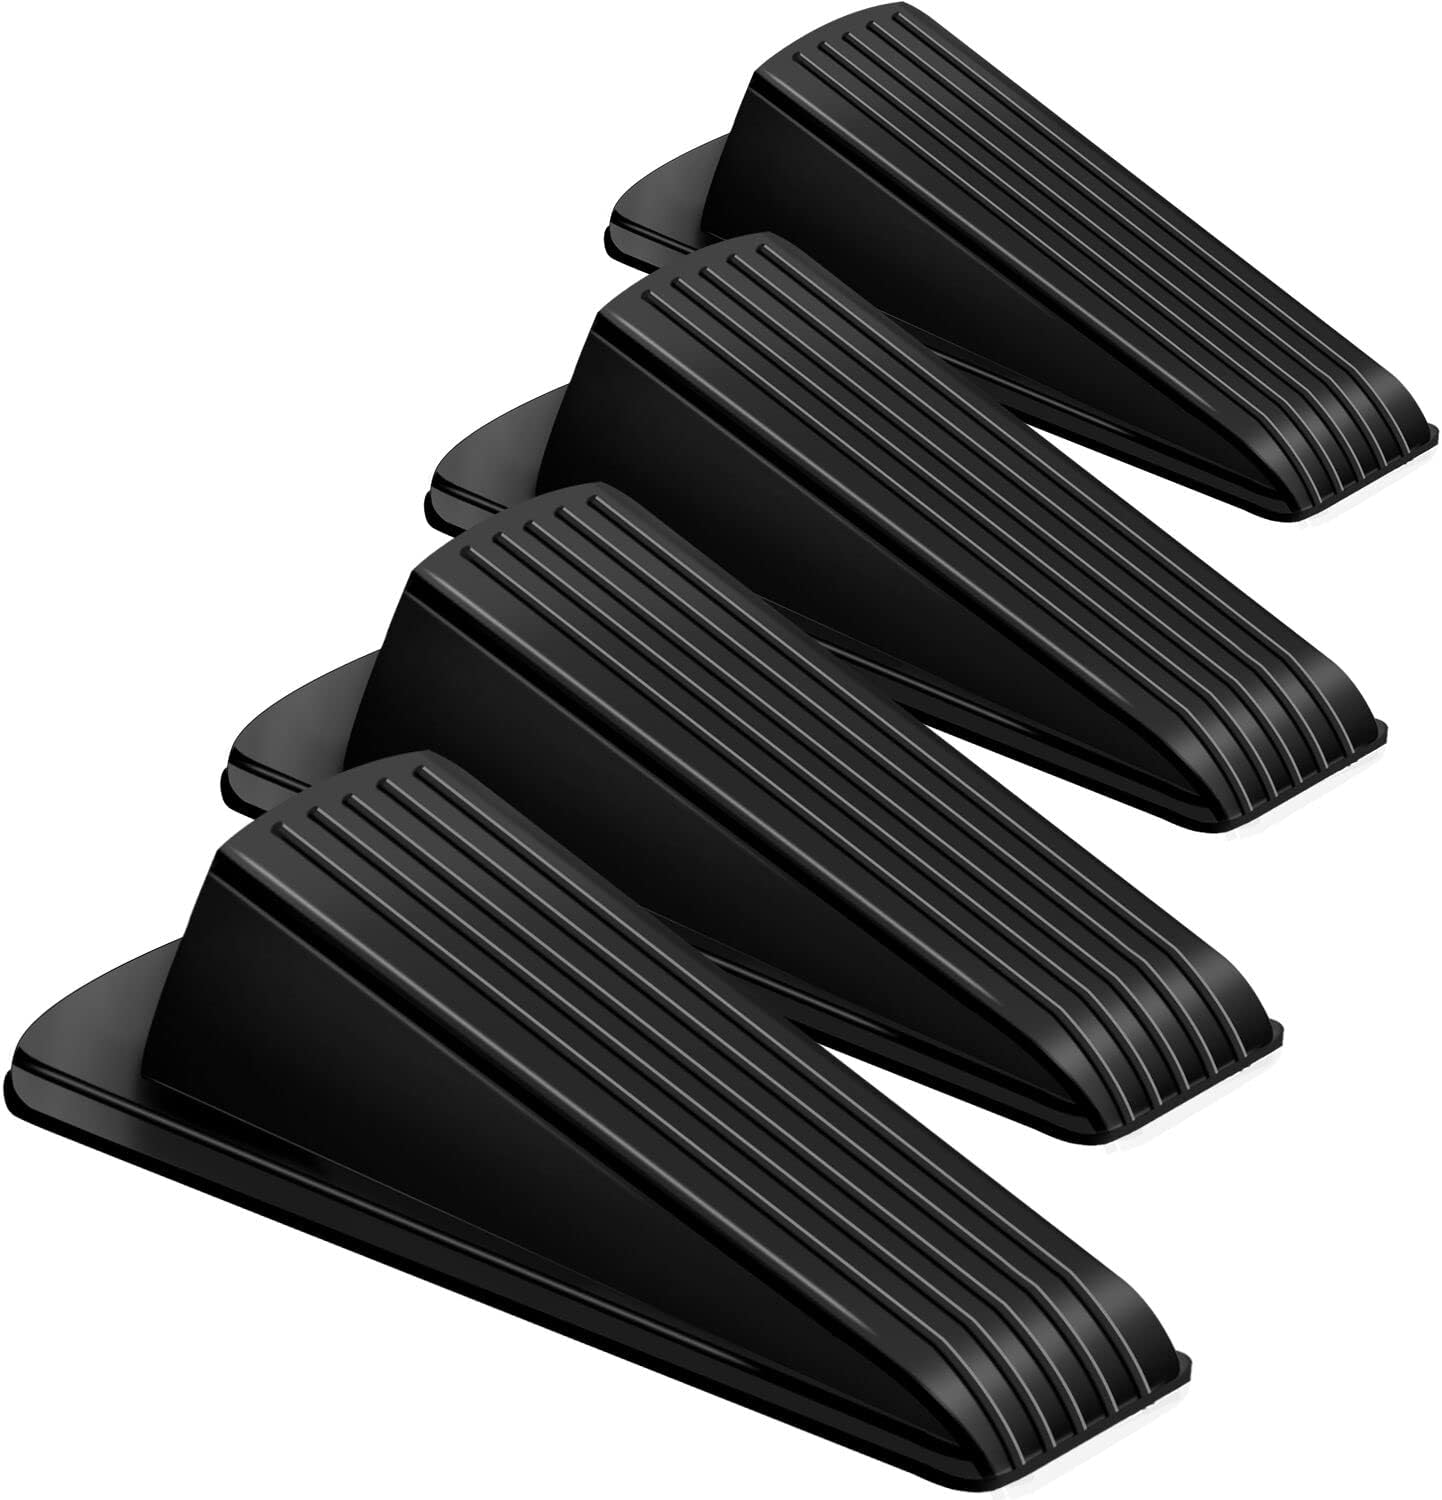 Today Only! Grab the Hottest Deals: Door Stoppers, 4 Pack Premium Rubber Stoppers Wedge